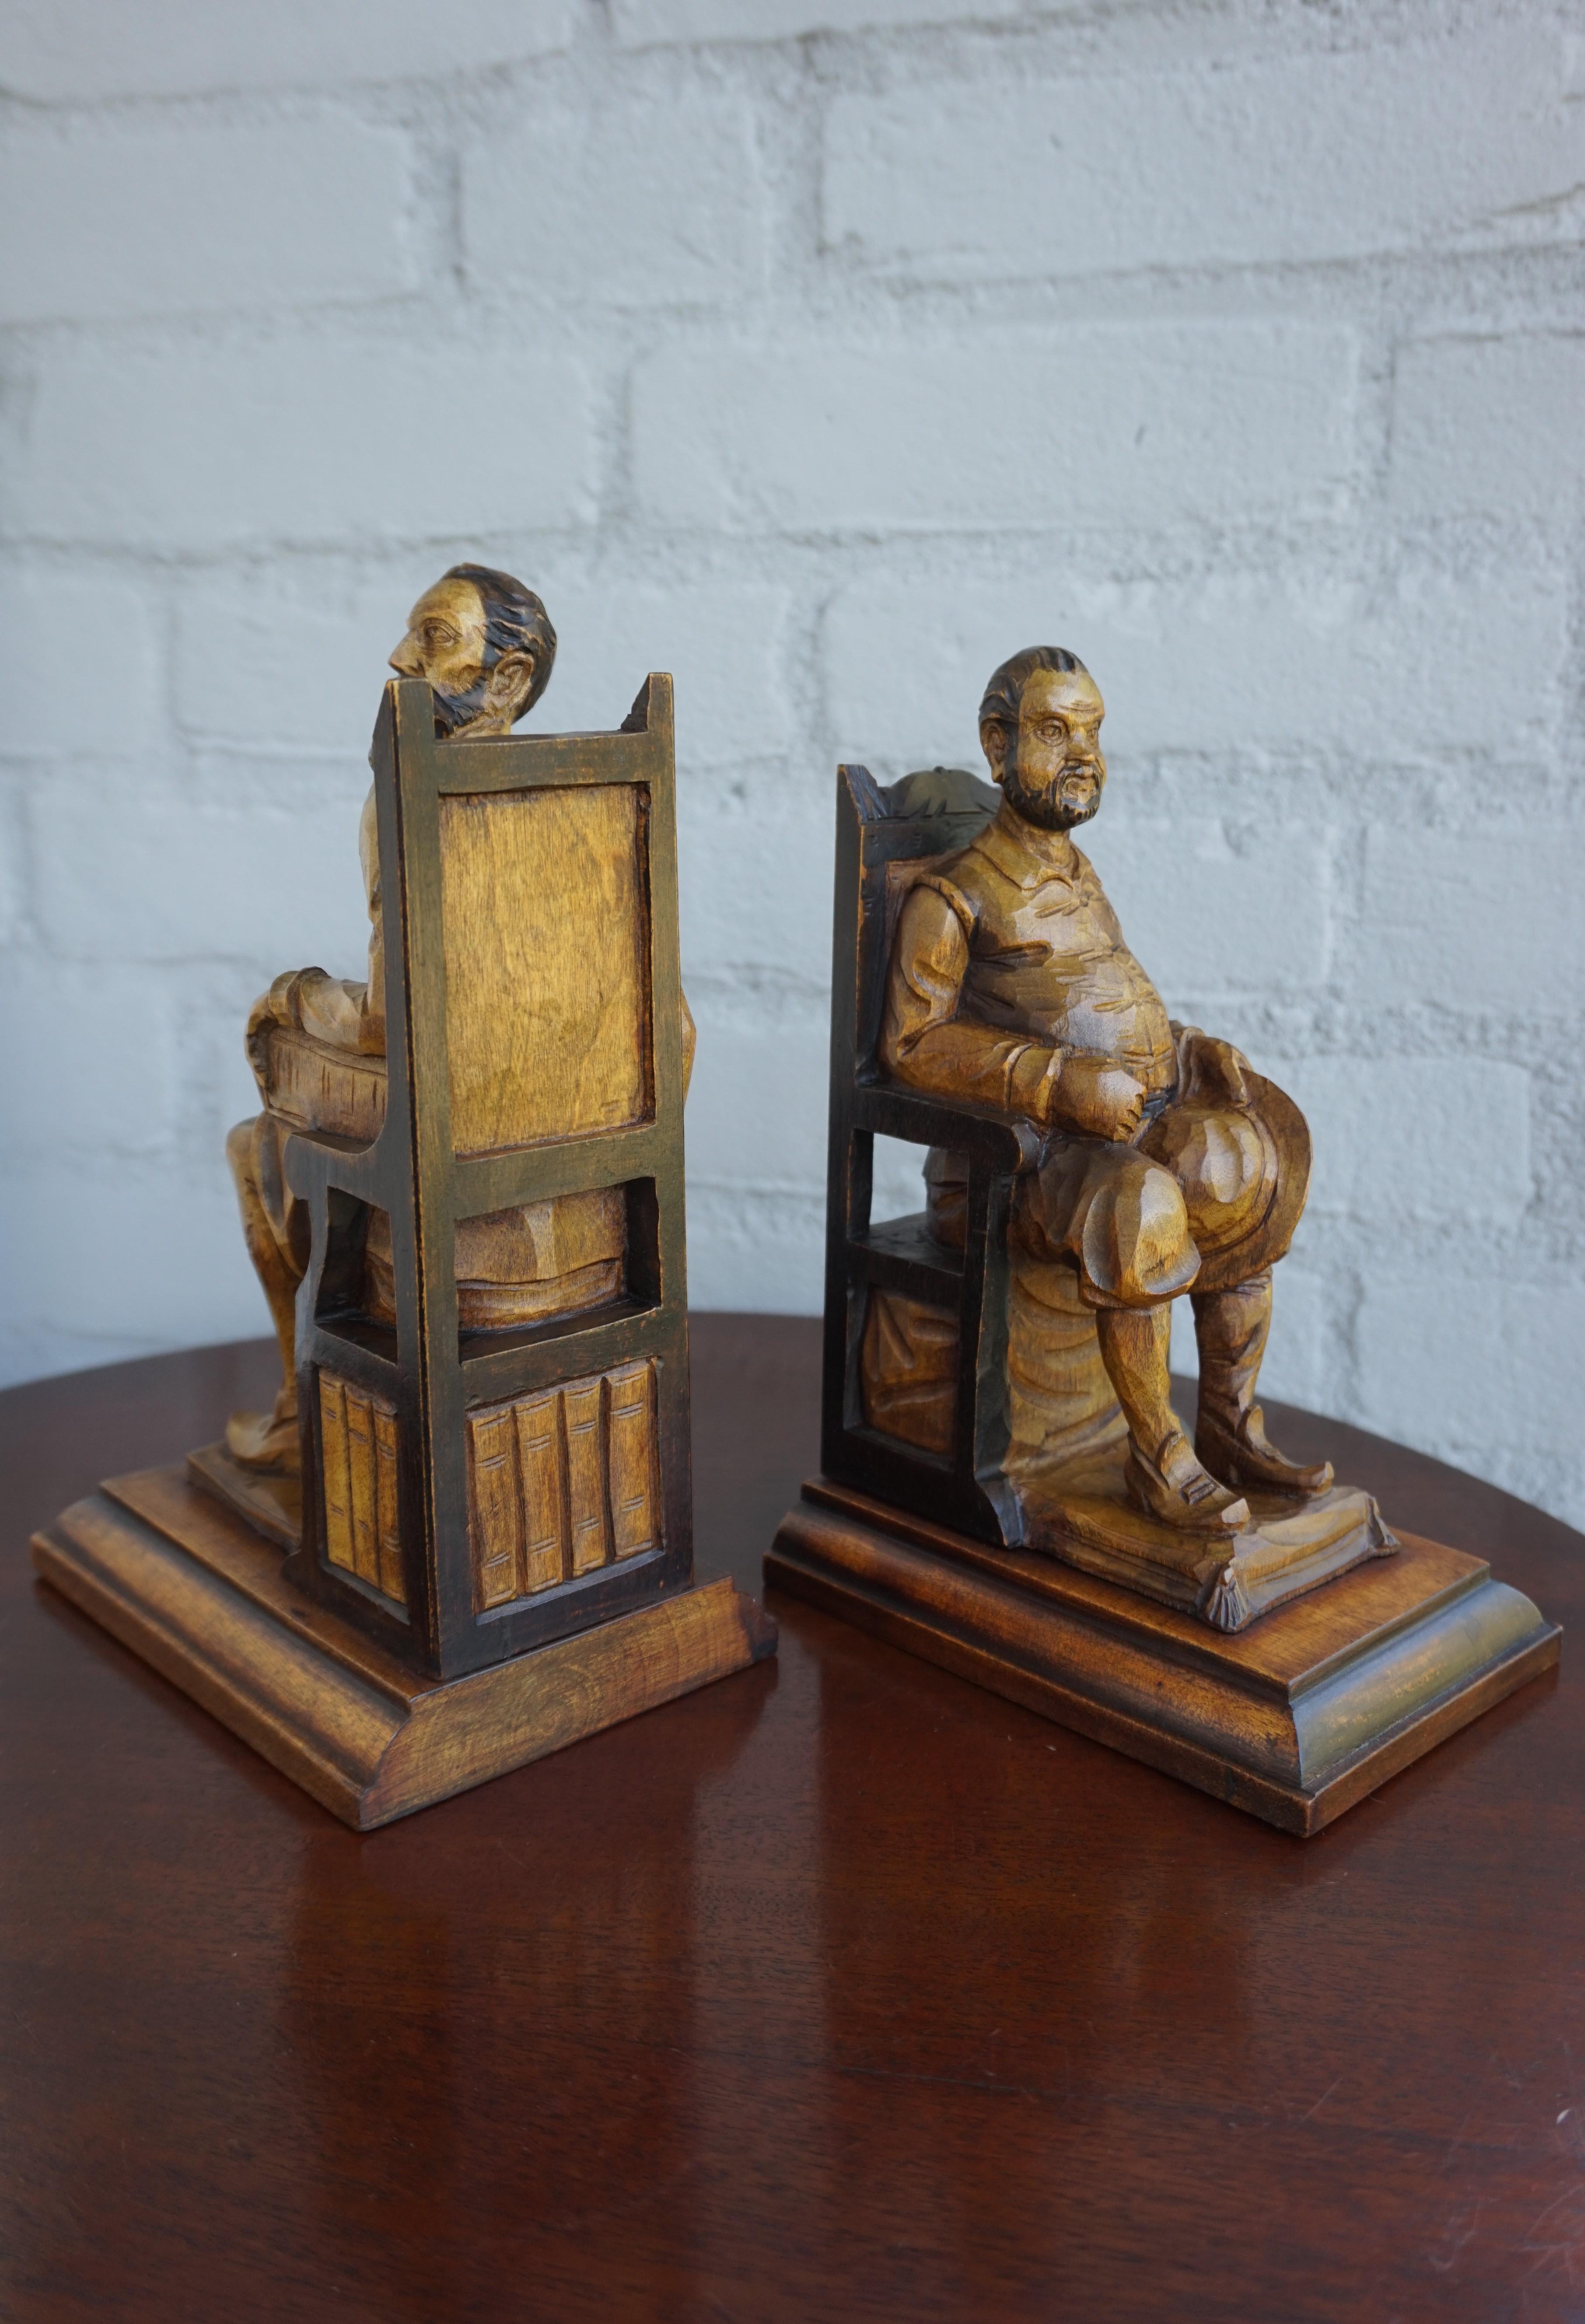 20th Century Good Size Pair of Hand Carved and Ebonized Don Quixote and Sancho Panza Bookends